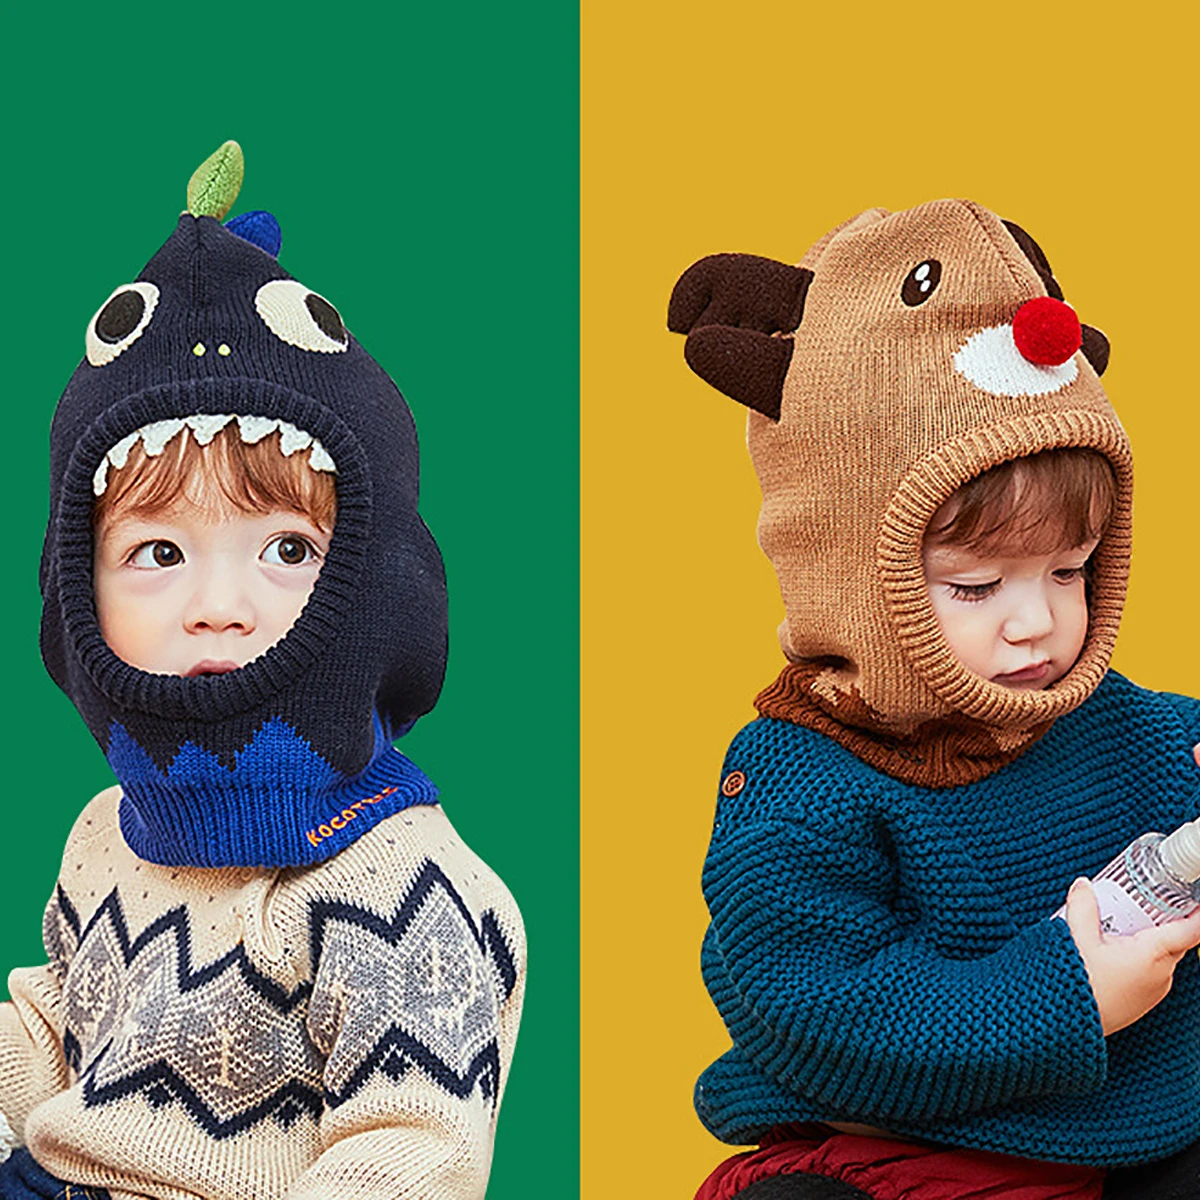 1-13 Years Old Boy Girl Protect Neck Cartoon Animal Windproof Winter Child Knit Hat Kids Girl's Earflap Caps